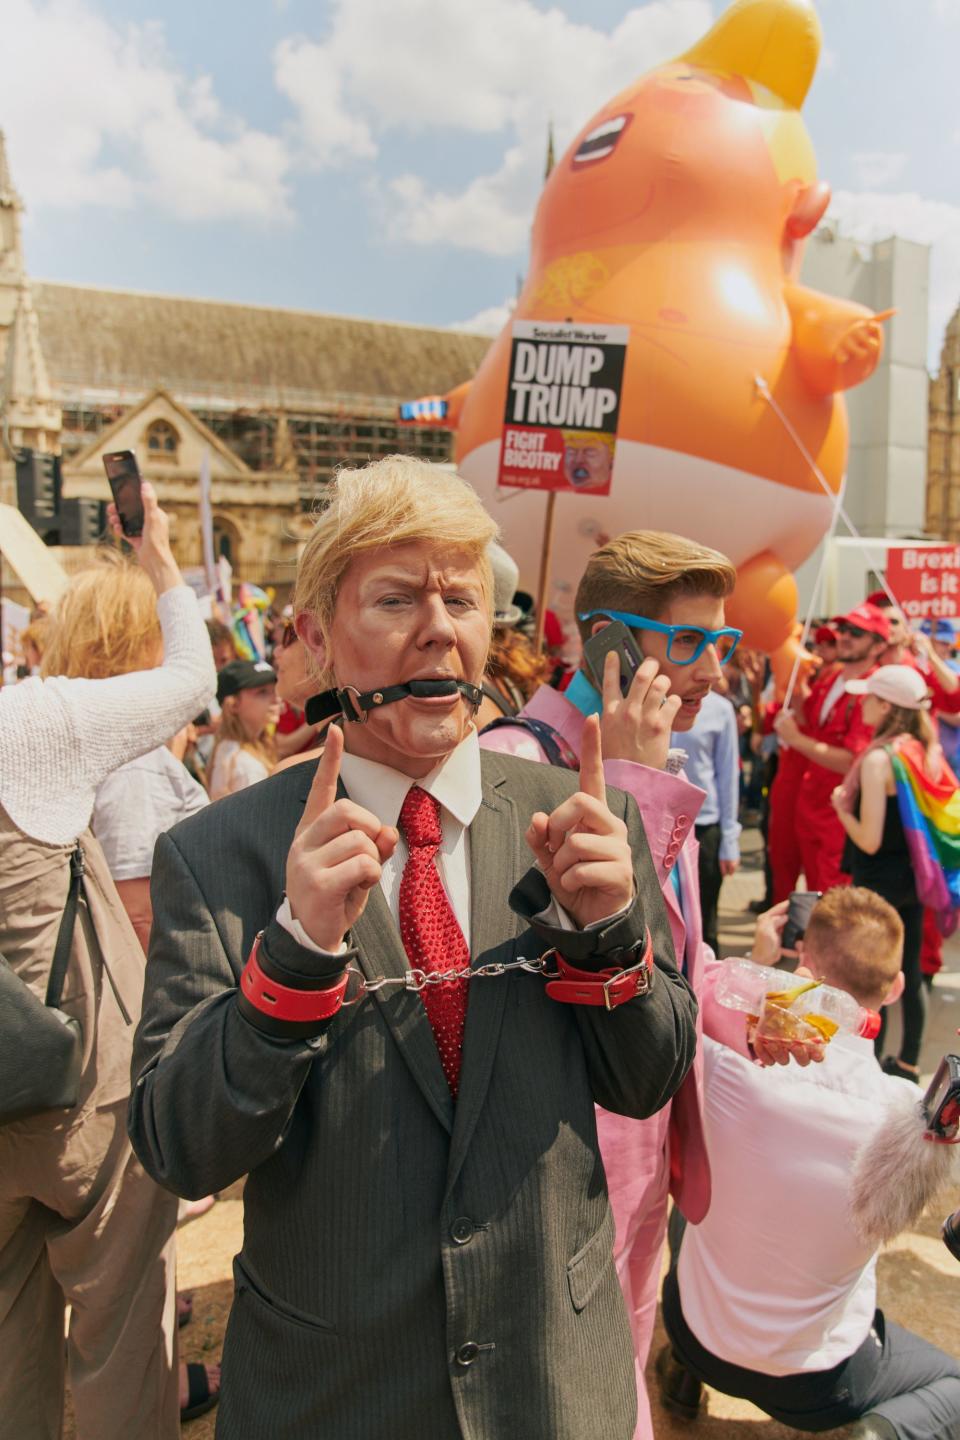 London swelled with protests against Donald Trump during his visit to the U.K., including a giant baby blimp.